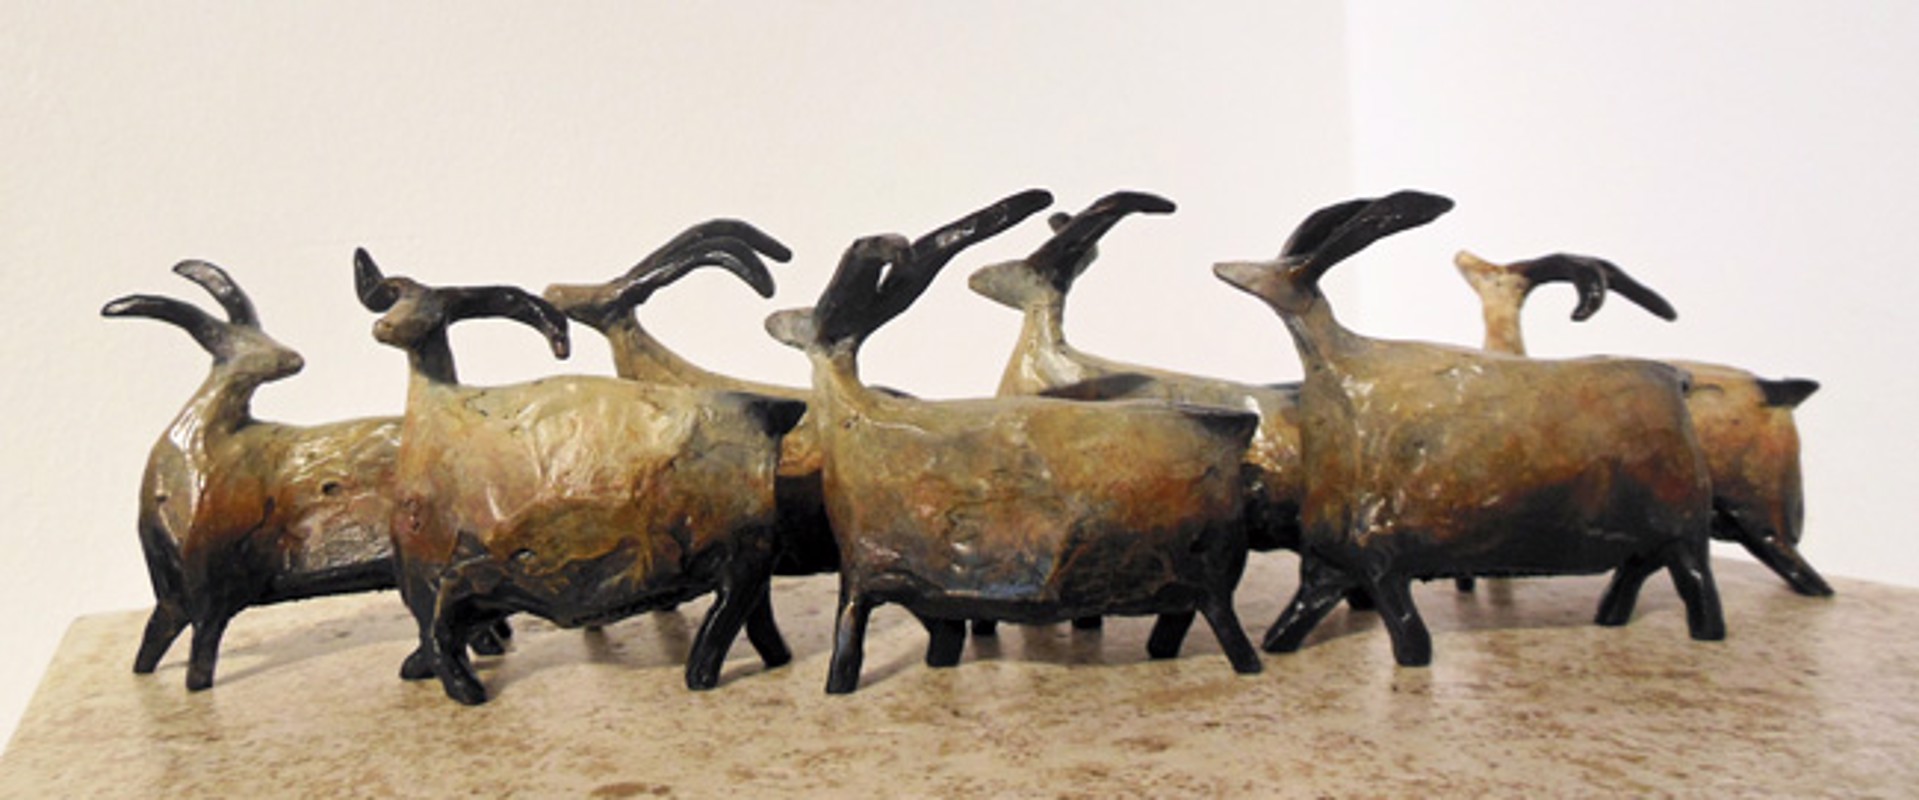 White Roaming Herd - Set of 7 Can Be Sold Individually $245/ea. by Jill Shwaiko